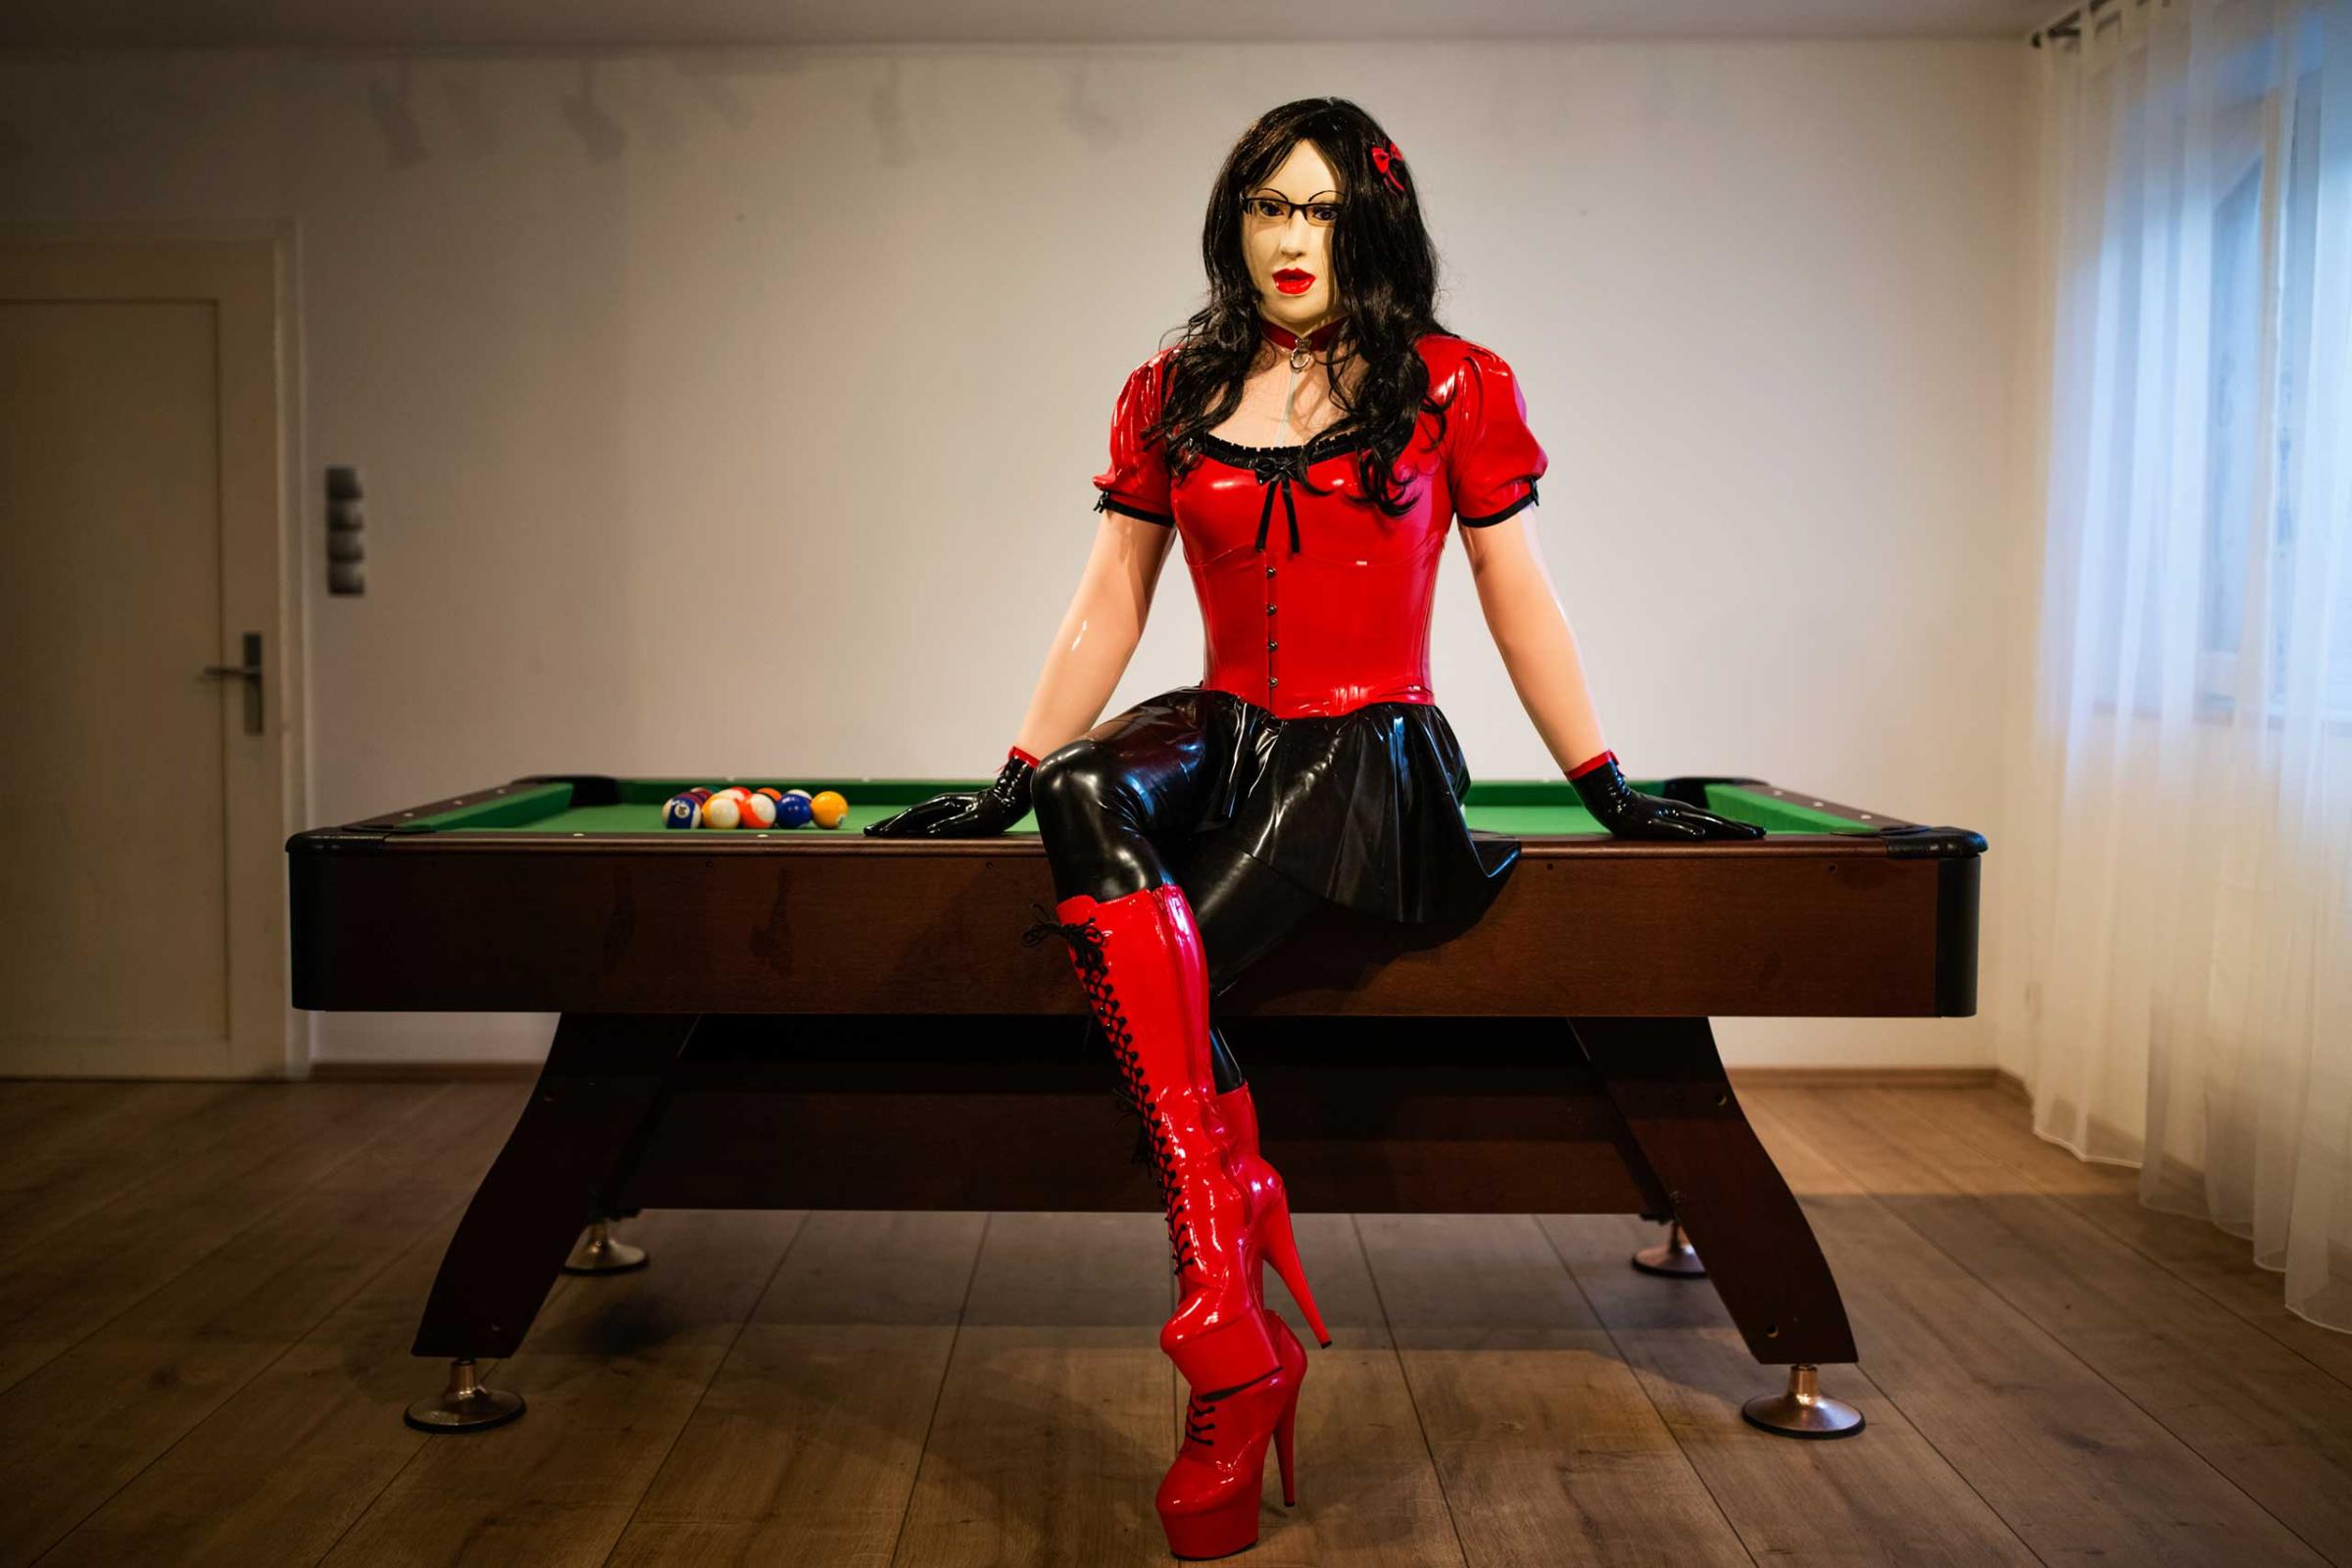 GÖPPINGEN, GERMANY - FEBRUARY 21, 2016: Female masker Manu, 34, alias Mina, poses for a portrait in his home on February 21, 2016 in Göppingen, Germany.'Giving up my manlihood by dressing as a rubberdoll exemplifies 'his bow to the beauty of femininity'.- Female Masker Manu, 34, alias Mina, heterosexual man